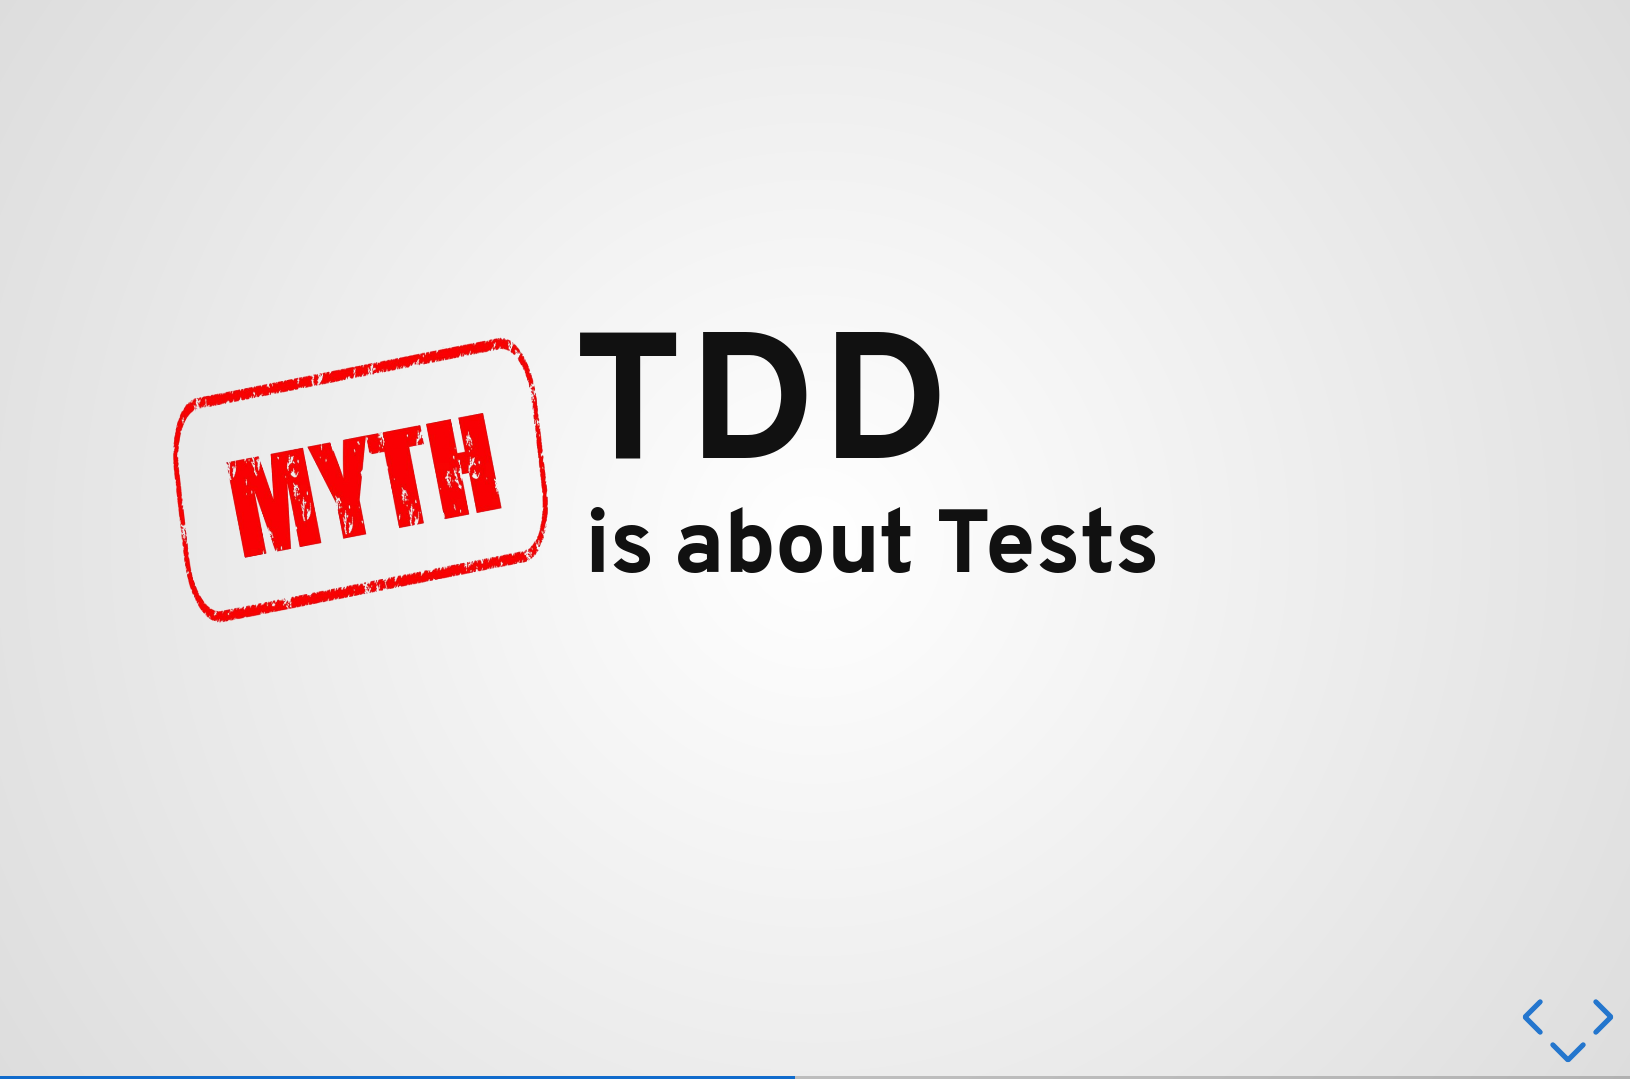 Myth #2: TDD is about Tests